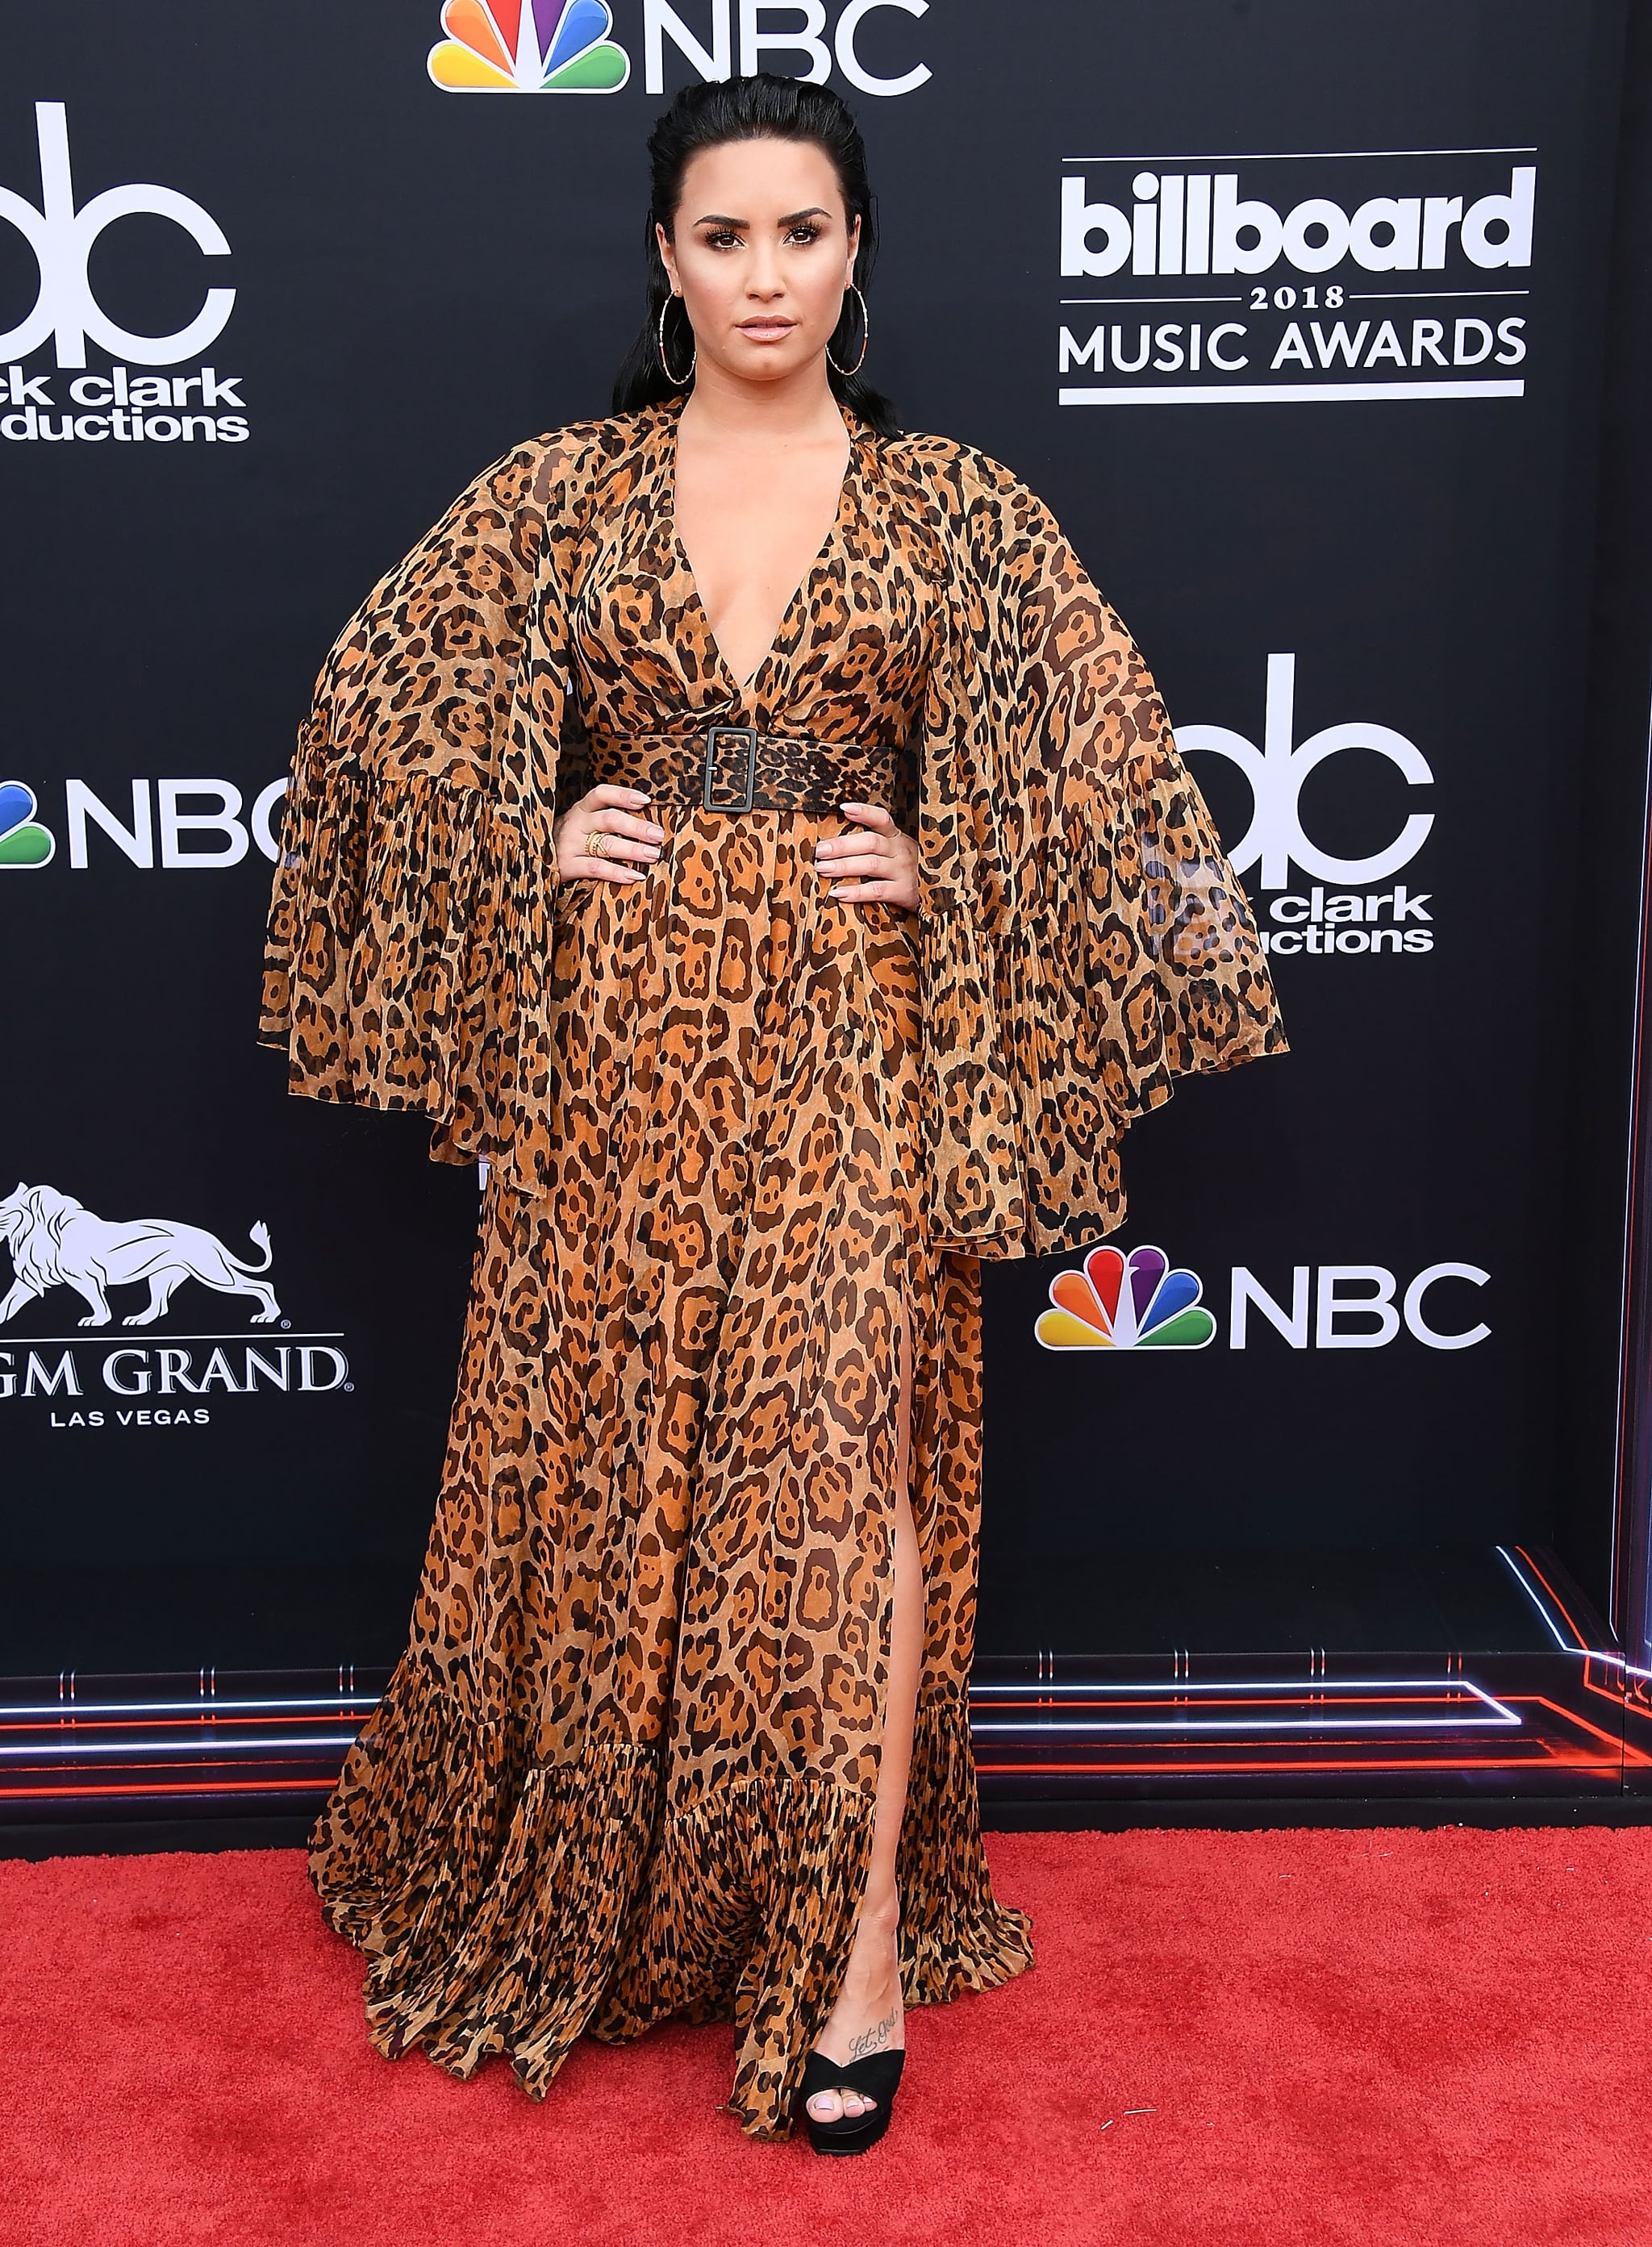 stang Recept skrubbe A Bold Animal-Print Gown | Demi Lovato Is Already Wedding-Dress Shopping,  and It's "Definitely Not a White Dress" | POPSUGAR Fashion Photo 7